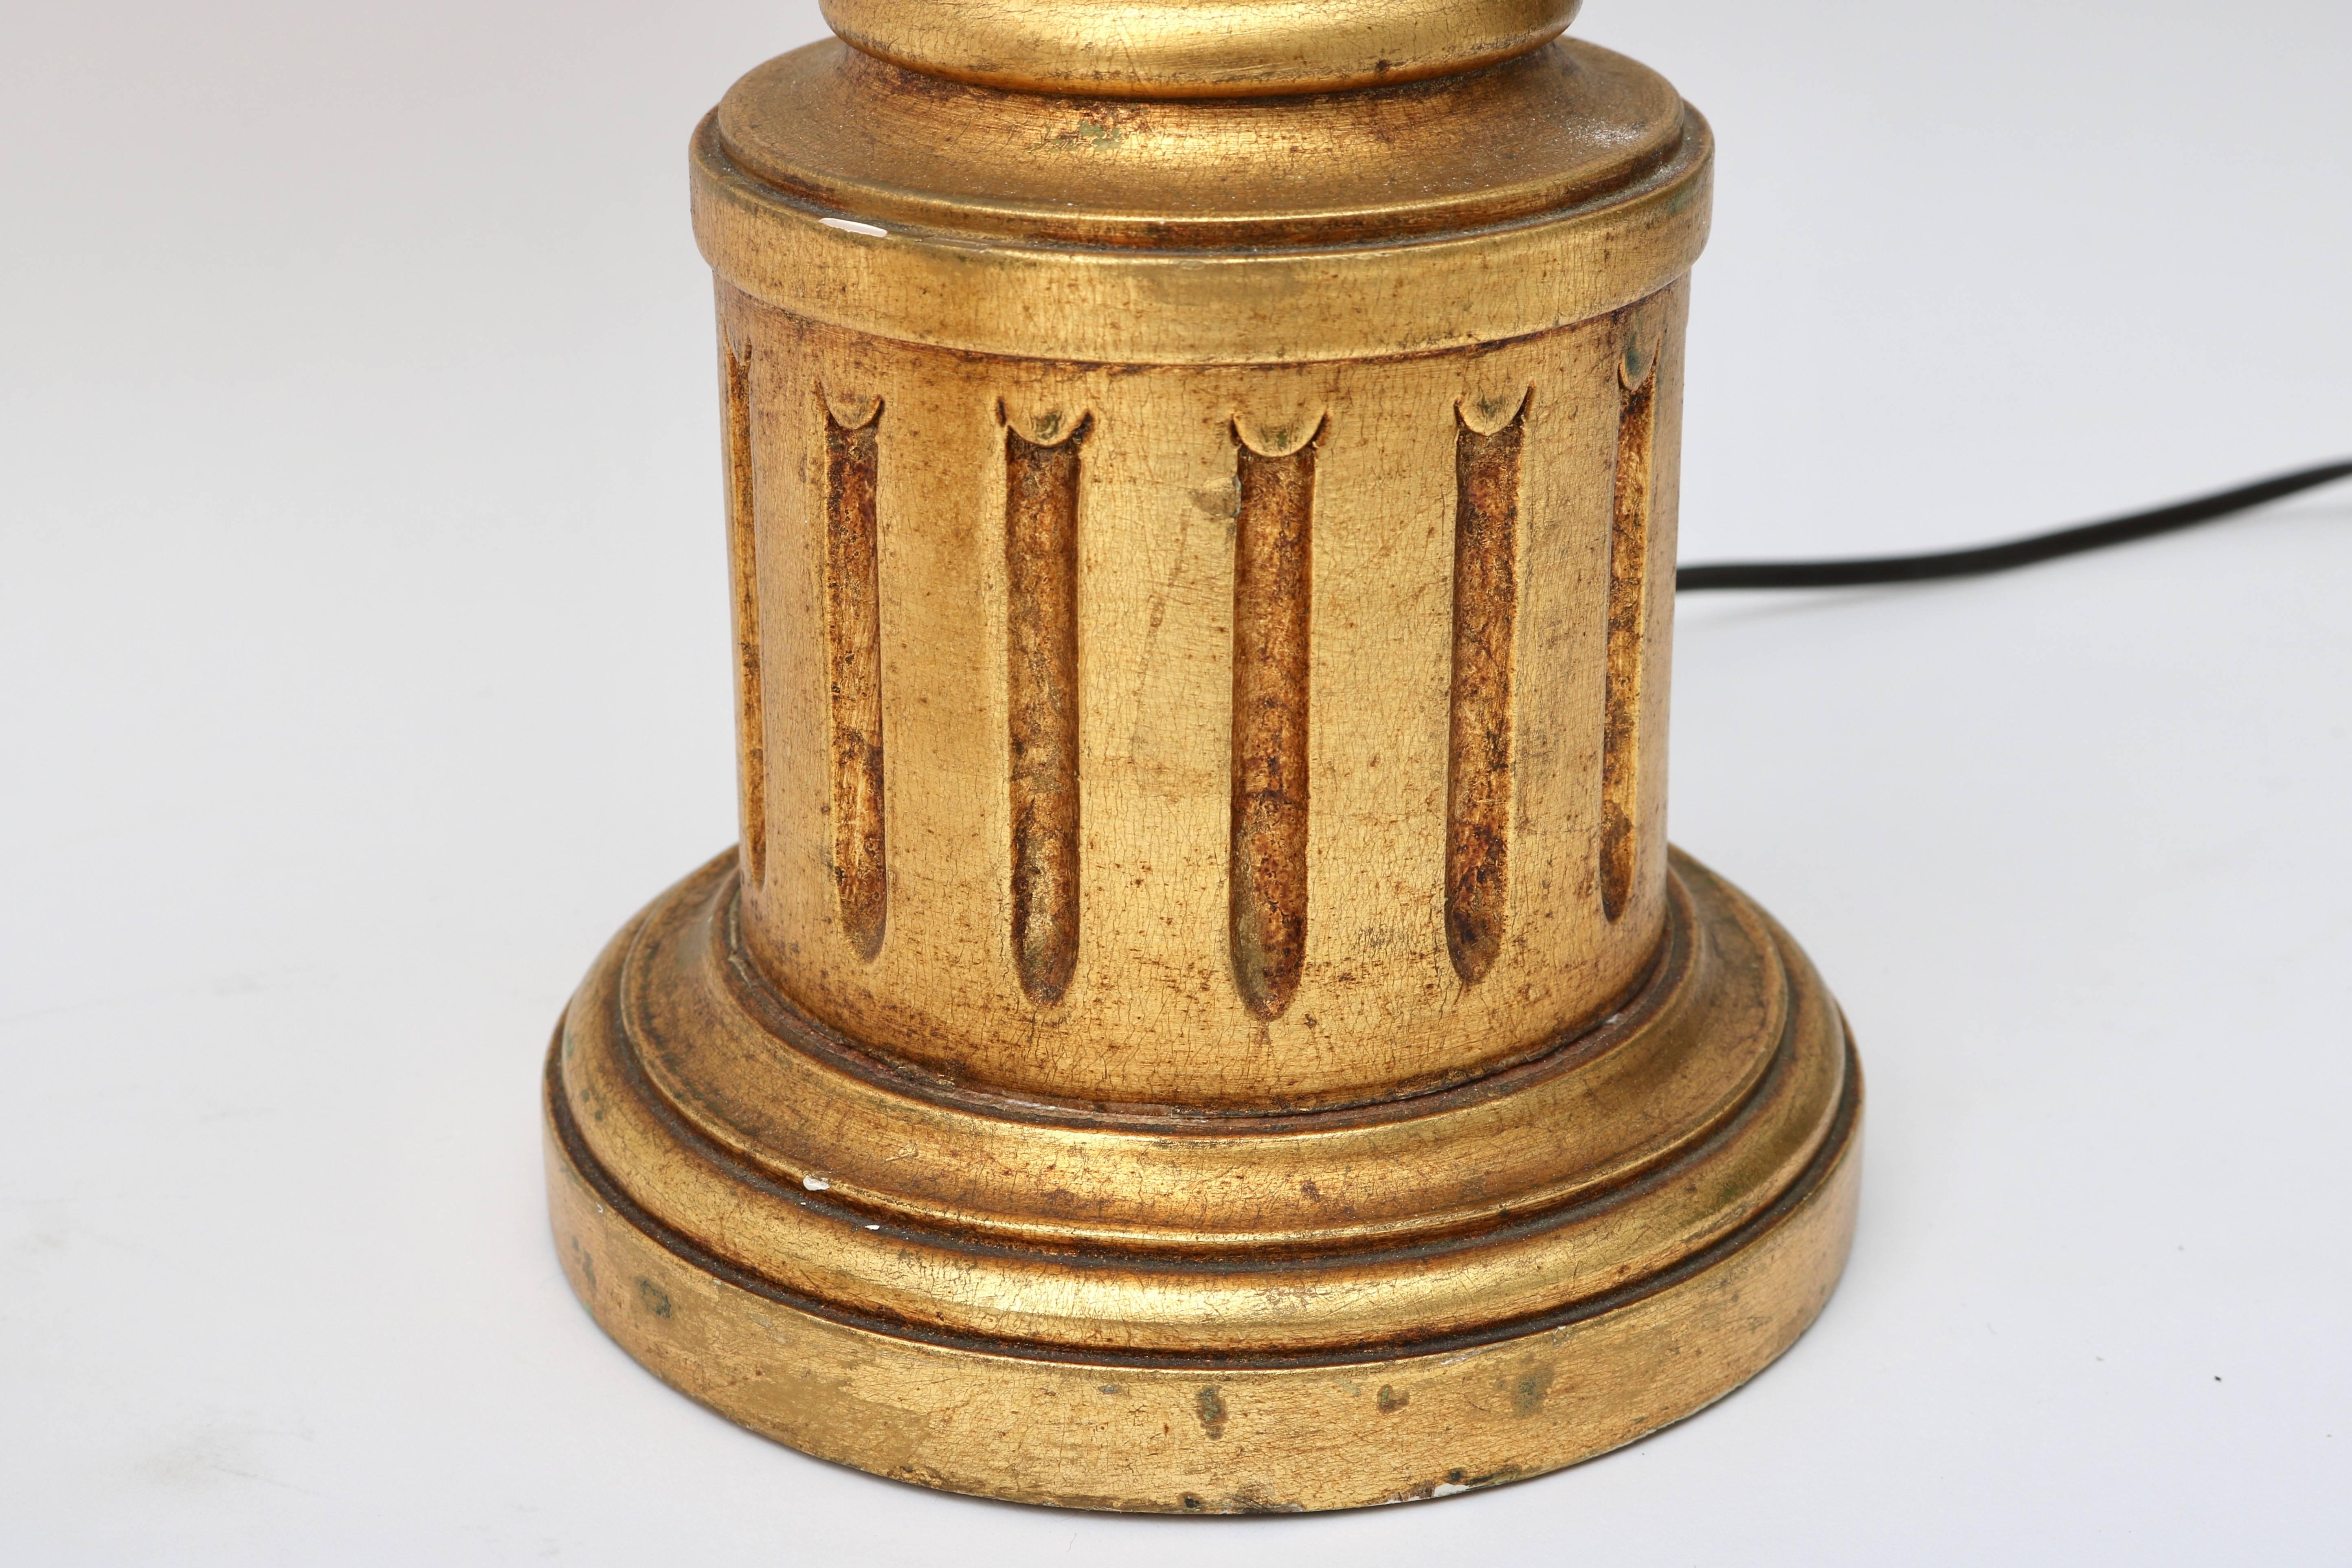 Pair of Louis XVI Style Urn-Form Table Lamps in a Bright, Antique Gold Finish 2